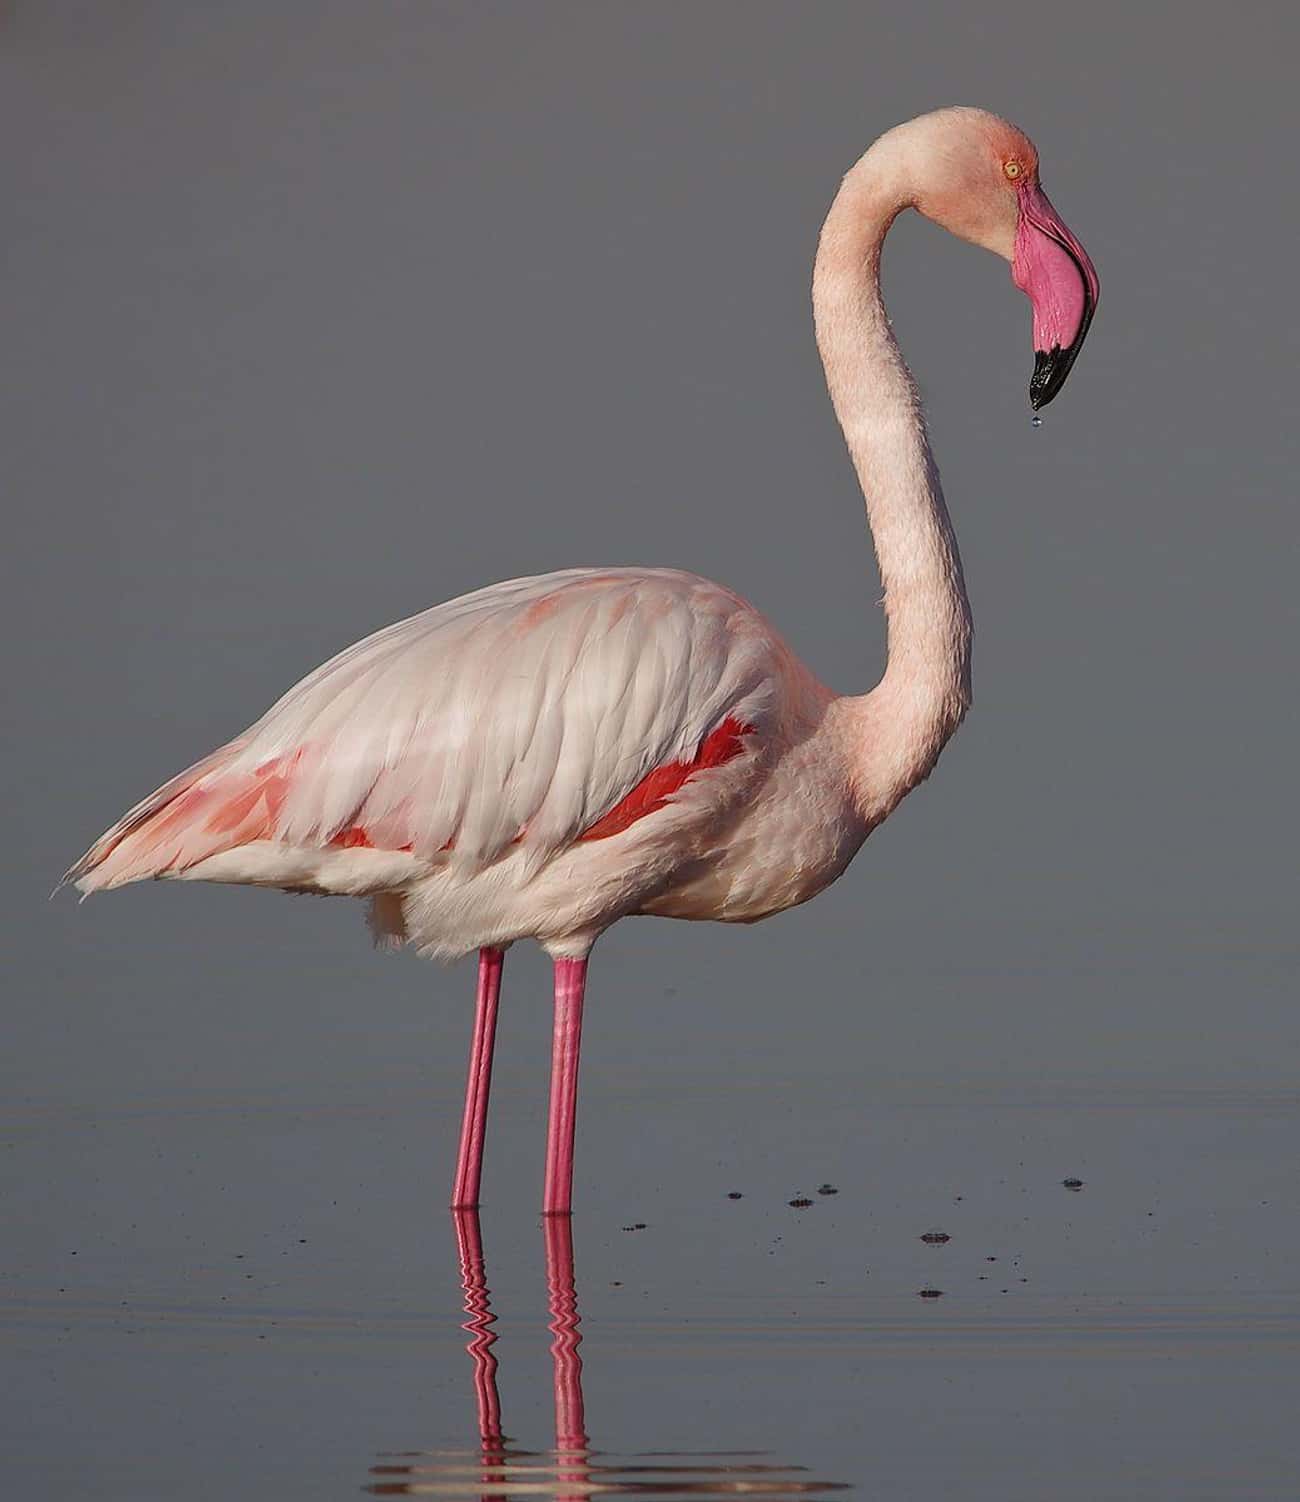 A Flamingo Made It From Kansas To Texas